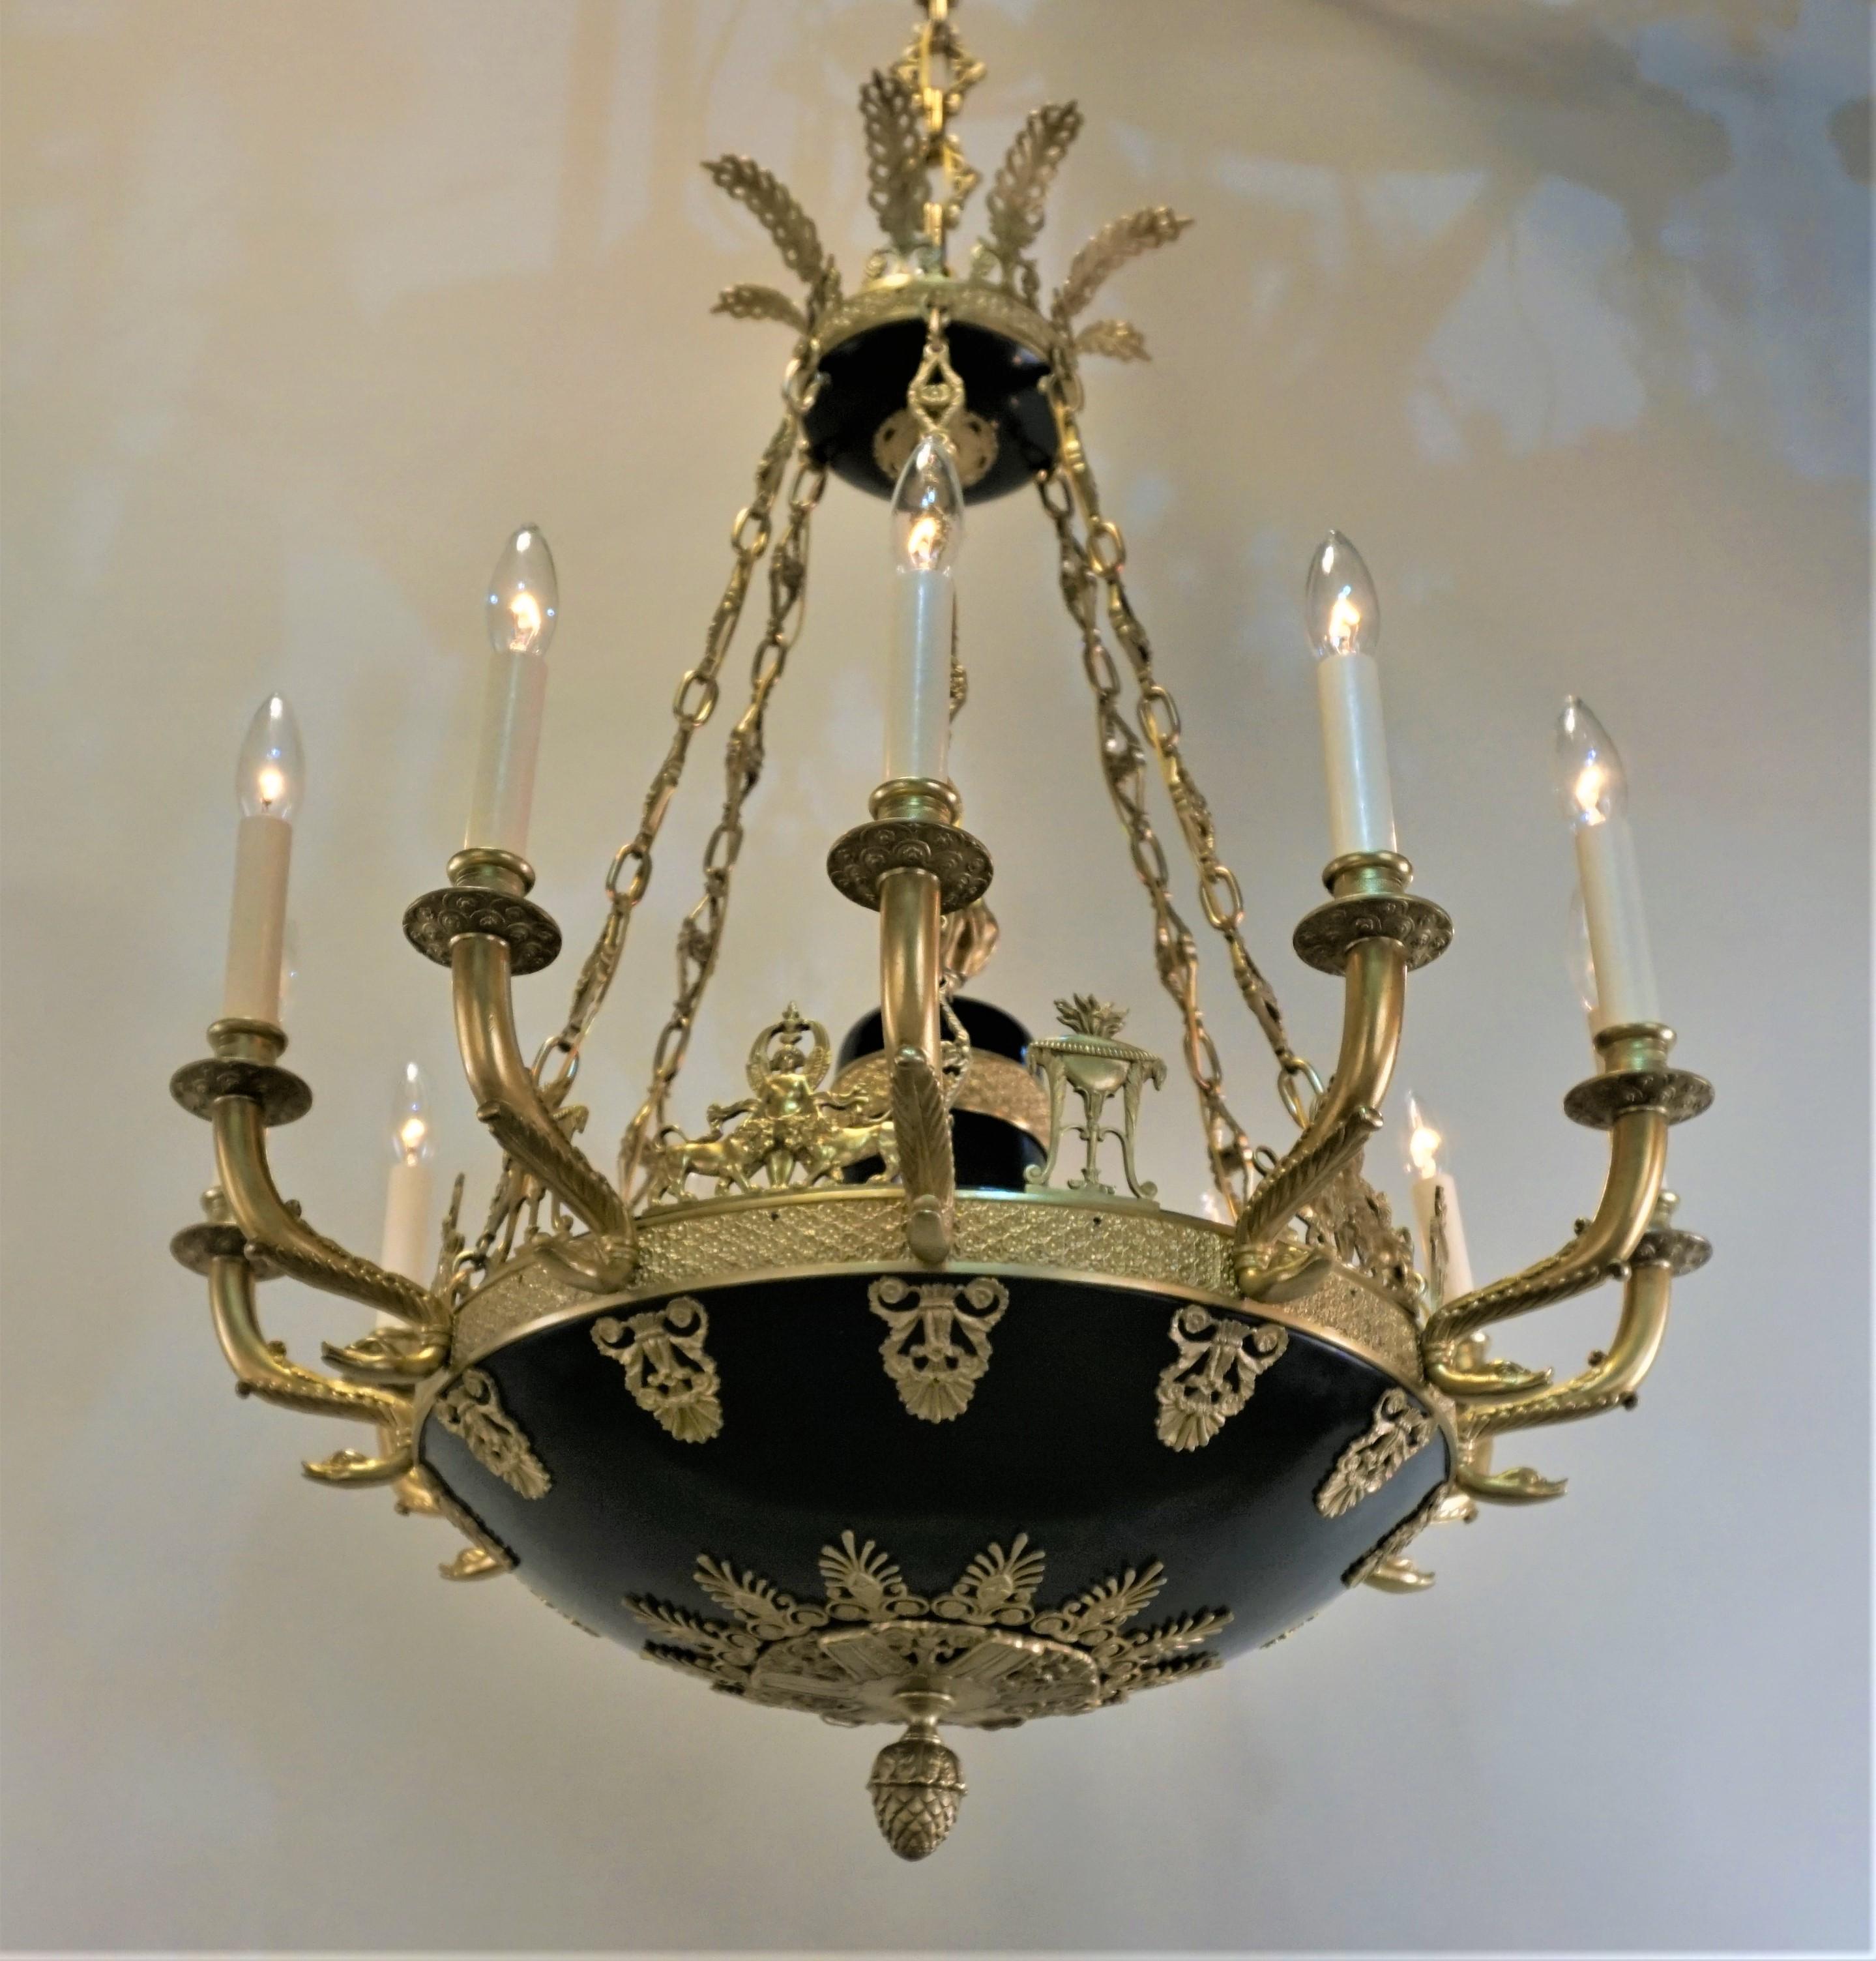 Impressive neoclassical large twelve light with great detail bronze 19th century French chandelier.
Height can be adjusted by removing some of the chain.